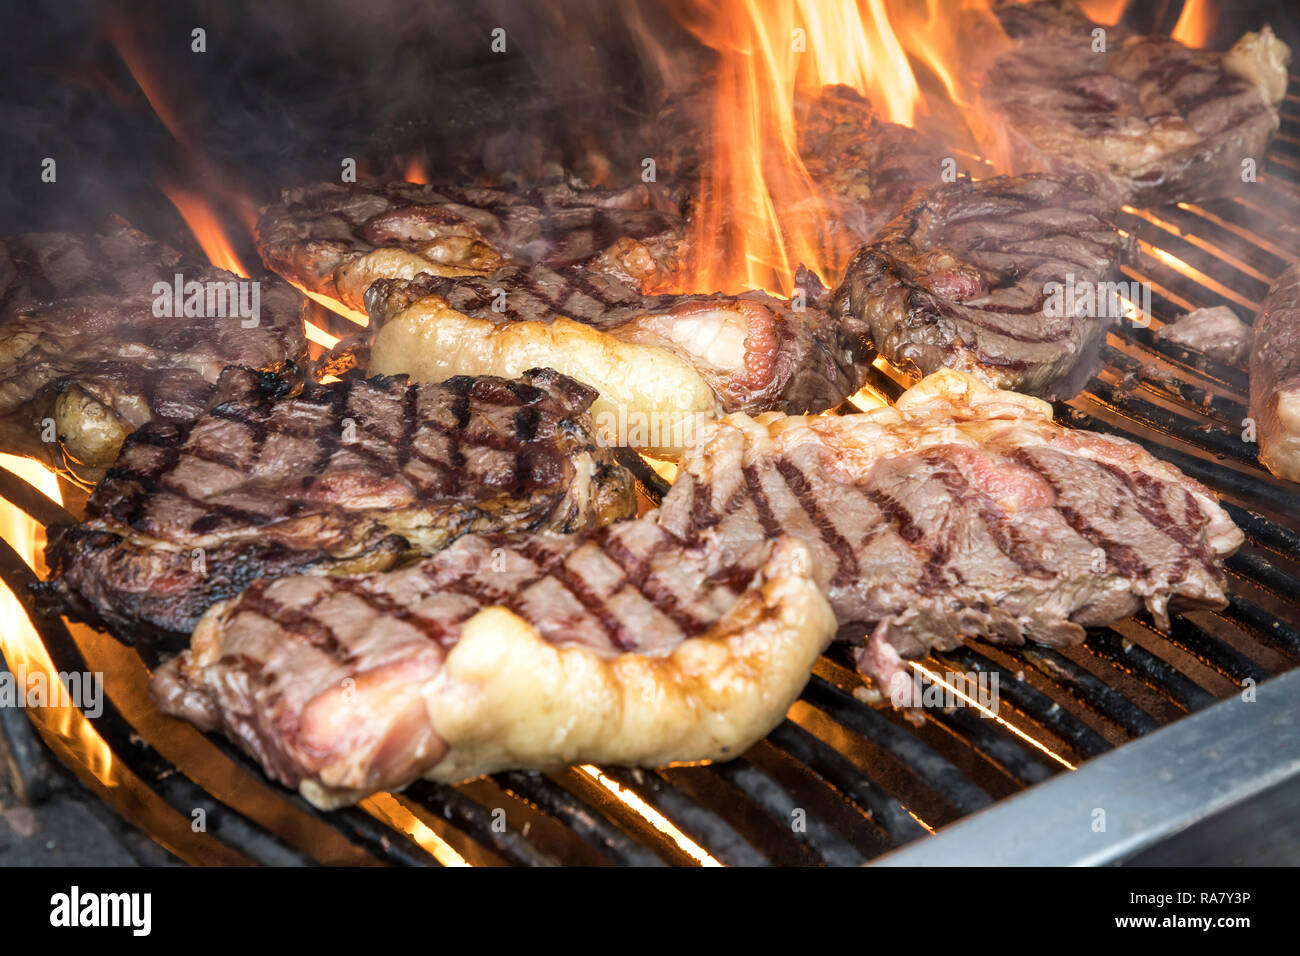 Steaks, from Galloway beef, are roasted on a grill, Stock Photo